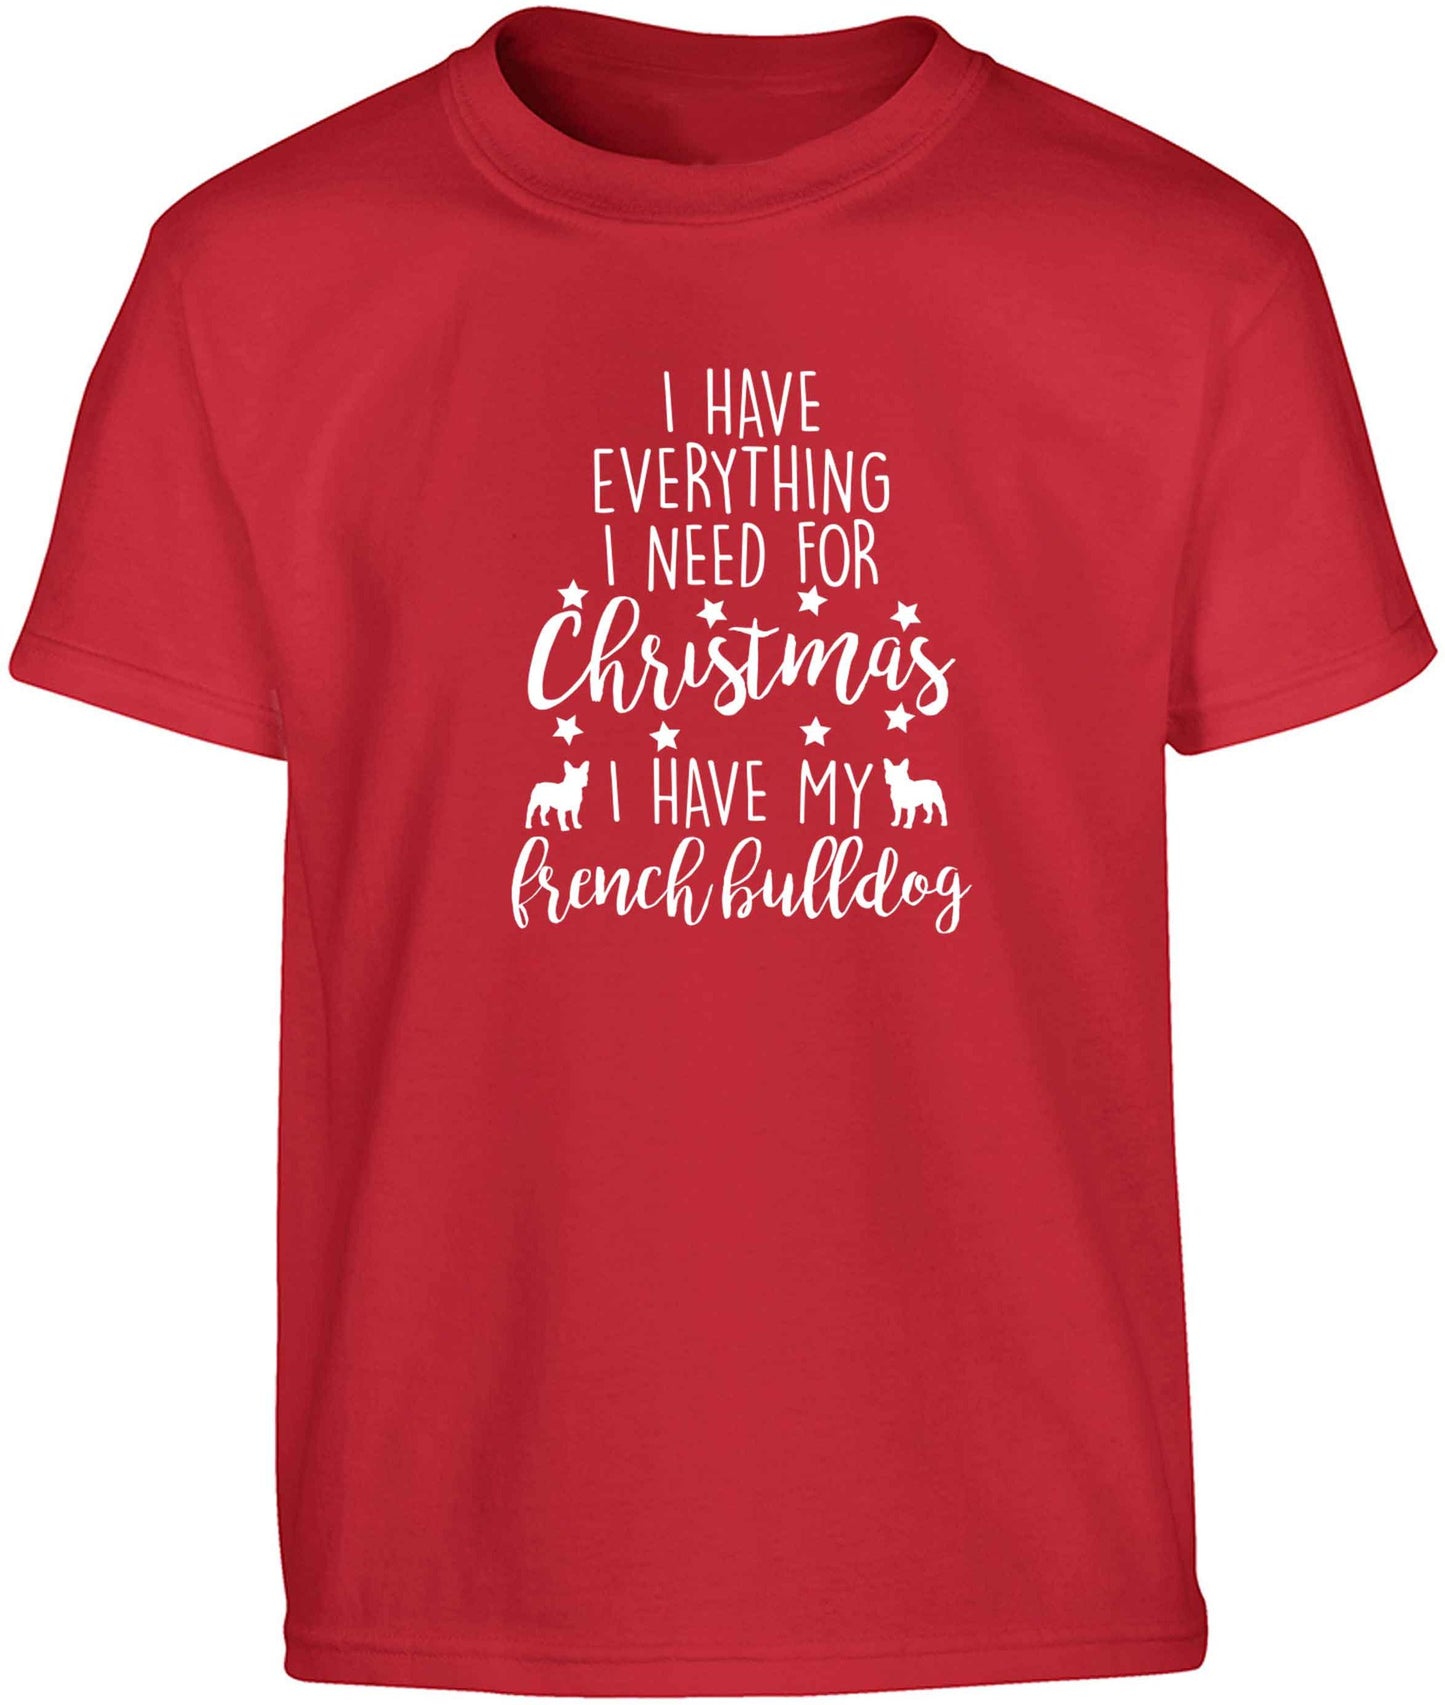 I have everything I need for Christmas I have my french bulldog Children's red Tshirt 12-13 Years